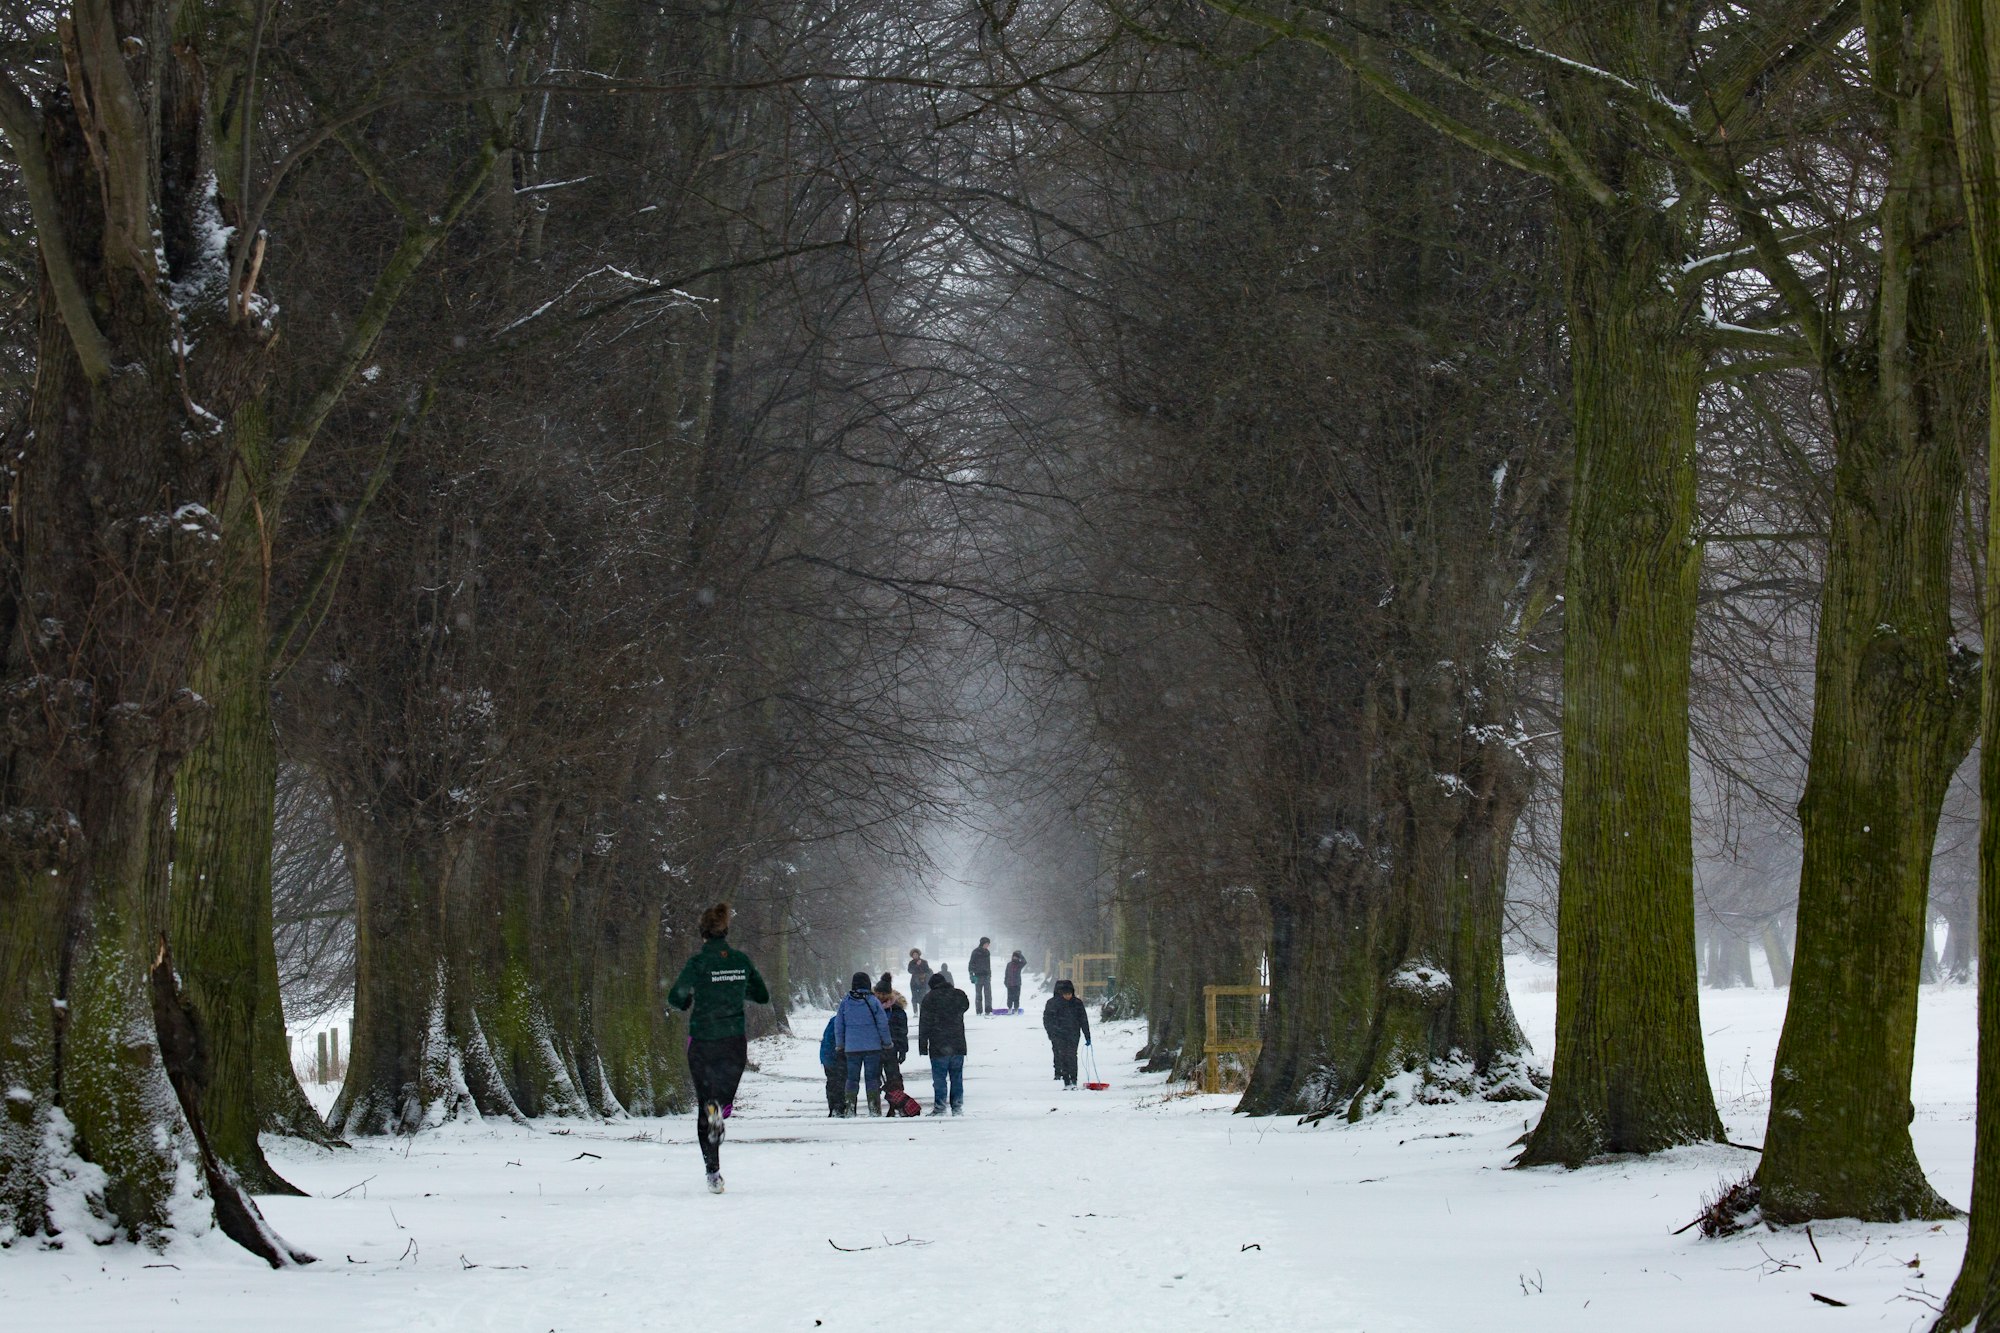 A man running through the park in the winter